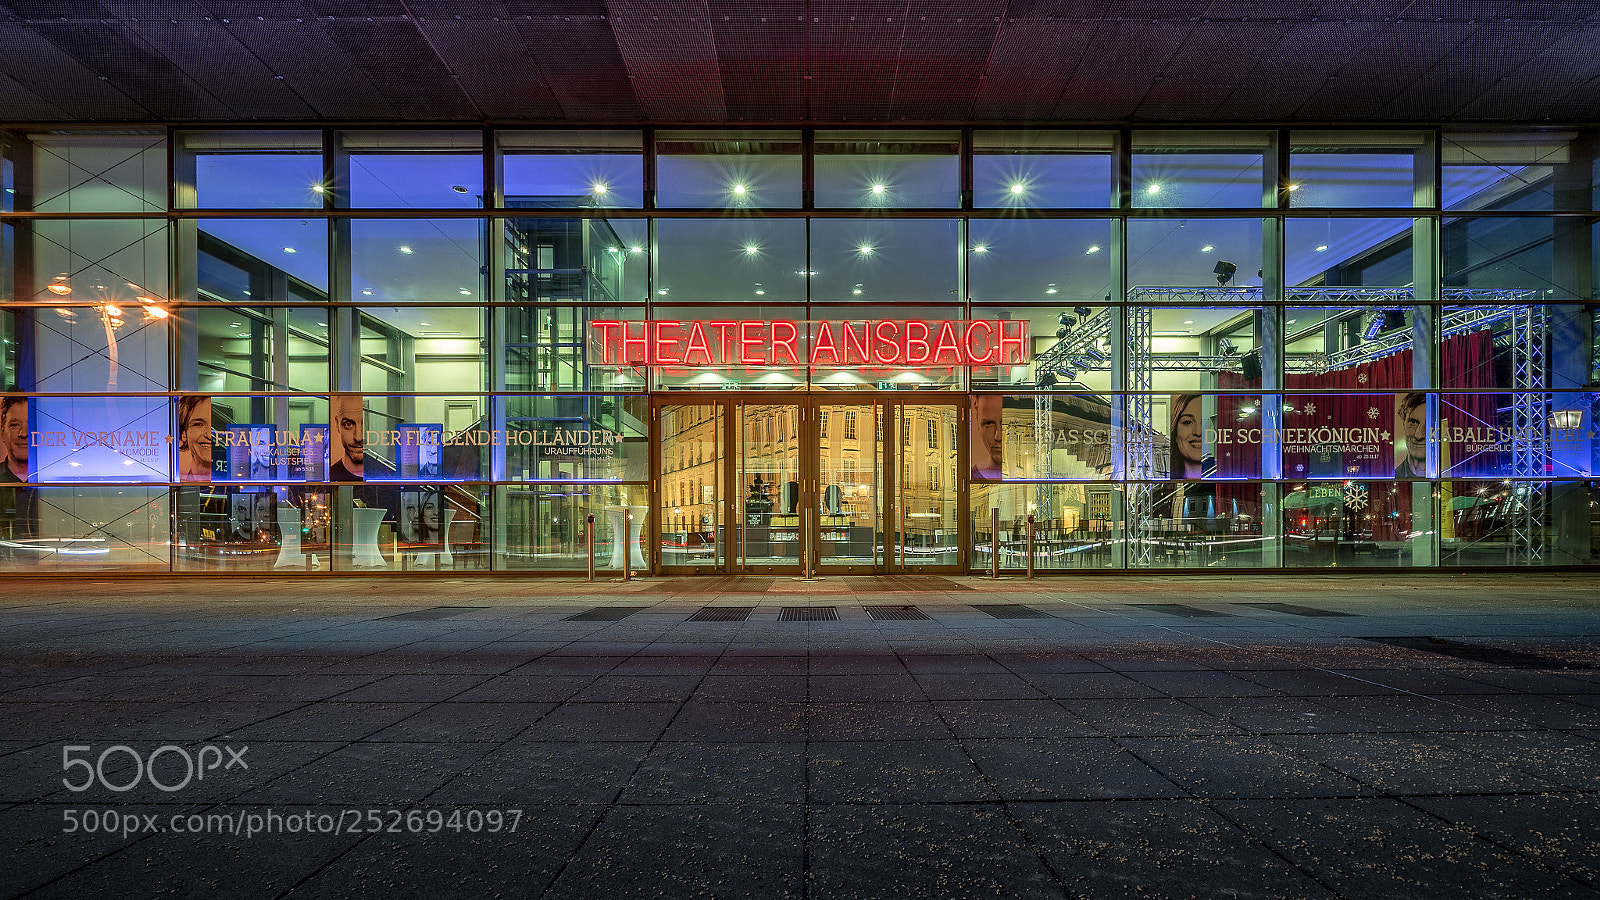 Sony a7 II sample photo. Theater ansbach / 20180222200831 photography